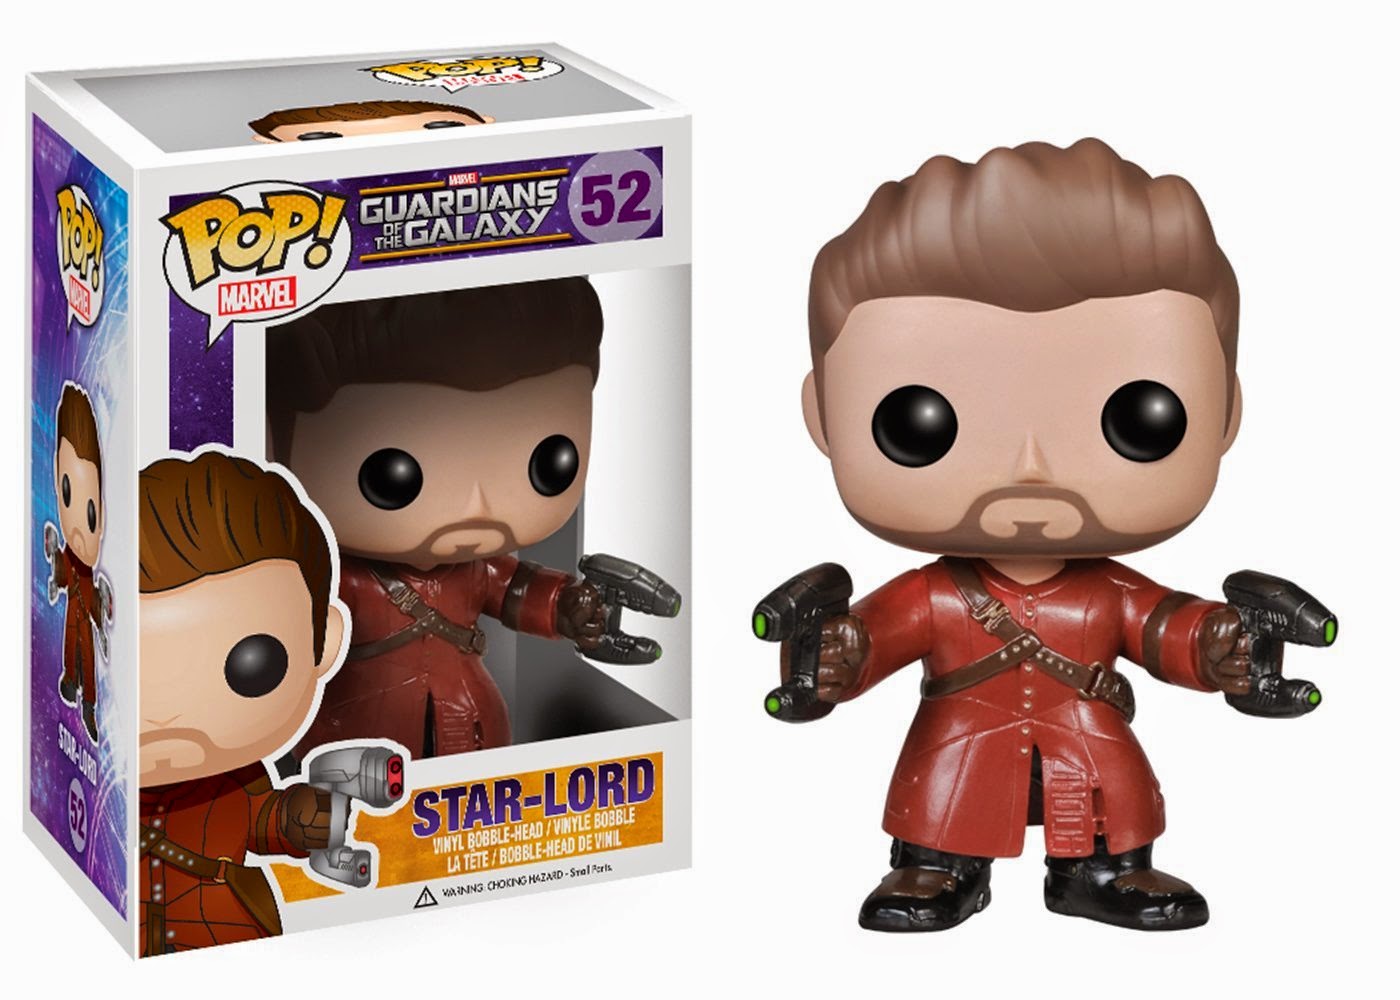 Amazon Exclusive Guardians of the Galaxy Unmasked Star-Lord Pop! Marvel Vinyl Figure by Funko